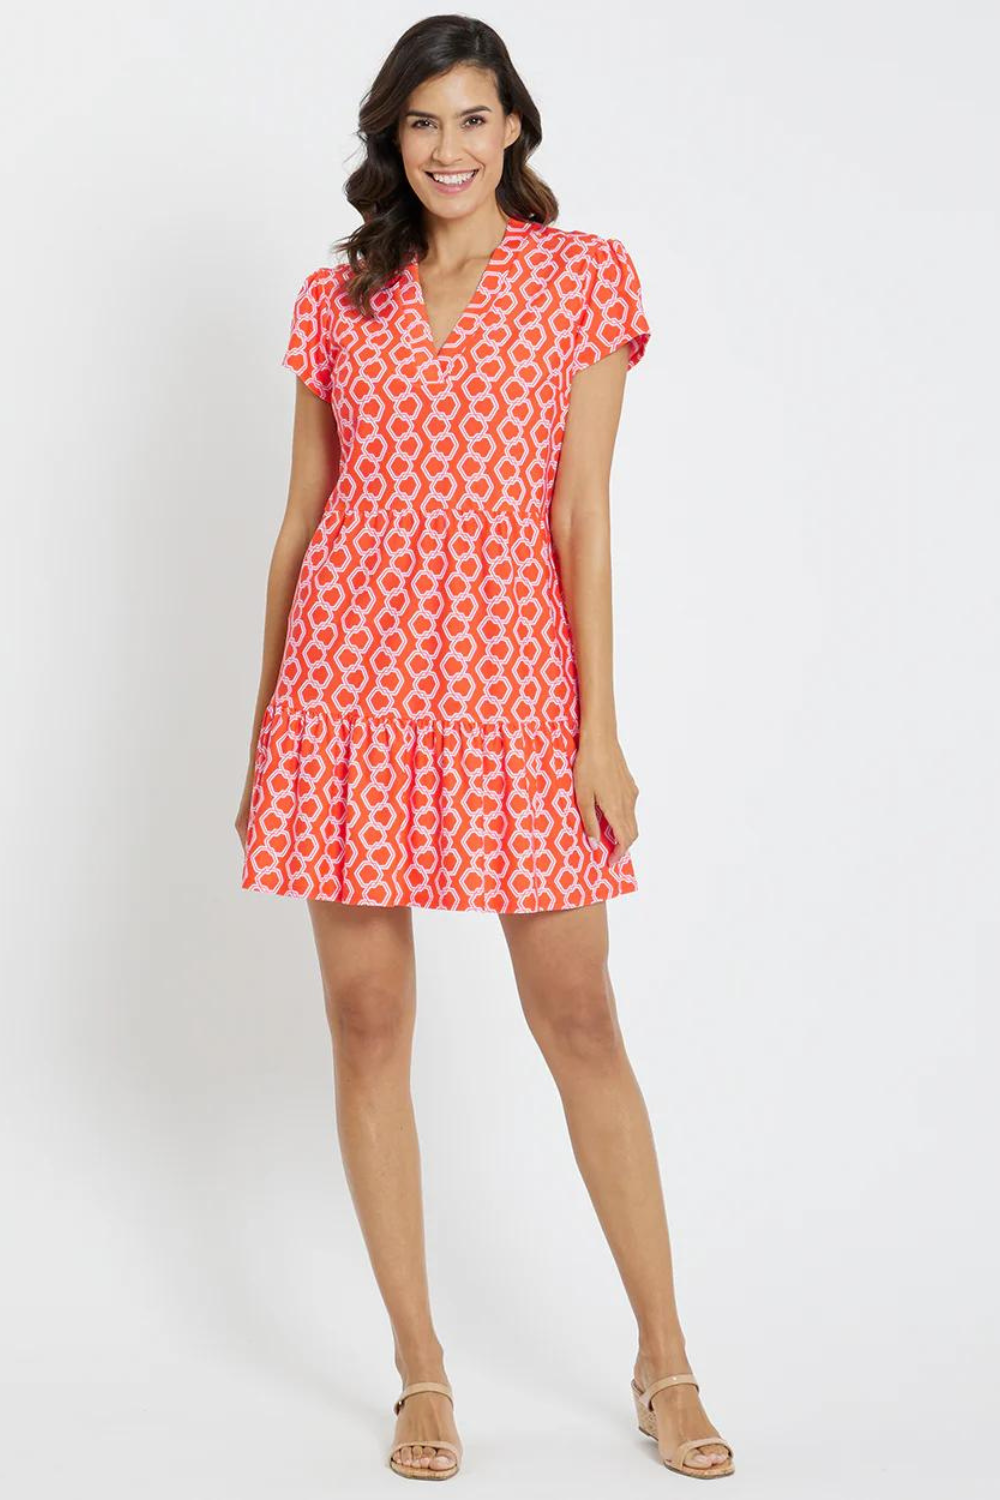 Jude Connally Ginger Dress - Dancing Links Apricot